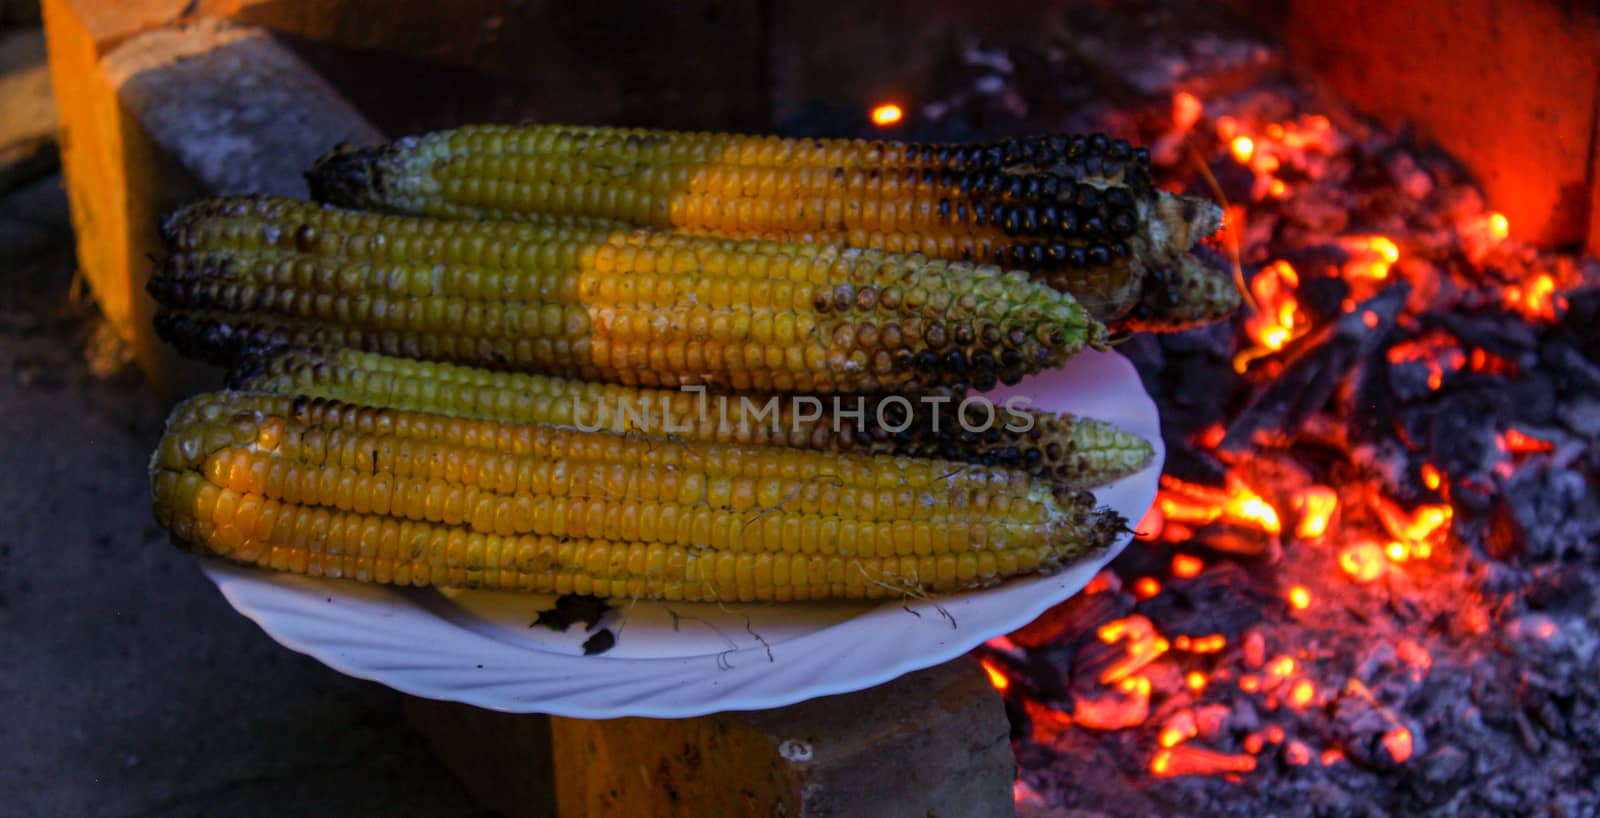 Banner with a plate of roasted corn with grills in the background in the fireplace. by mahirrov